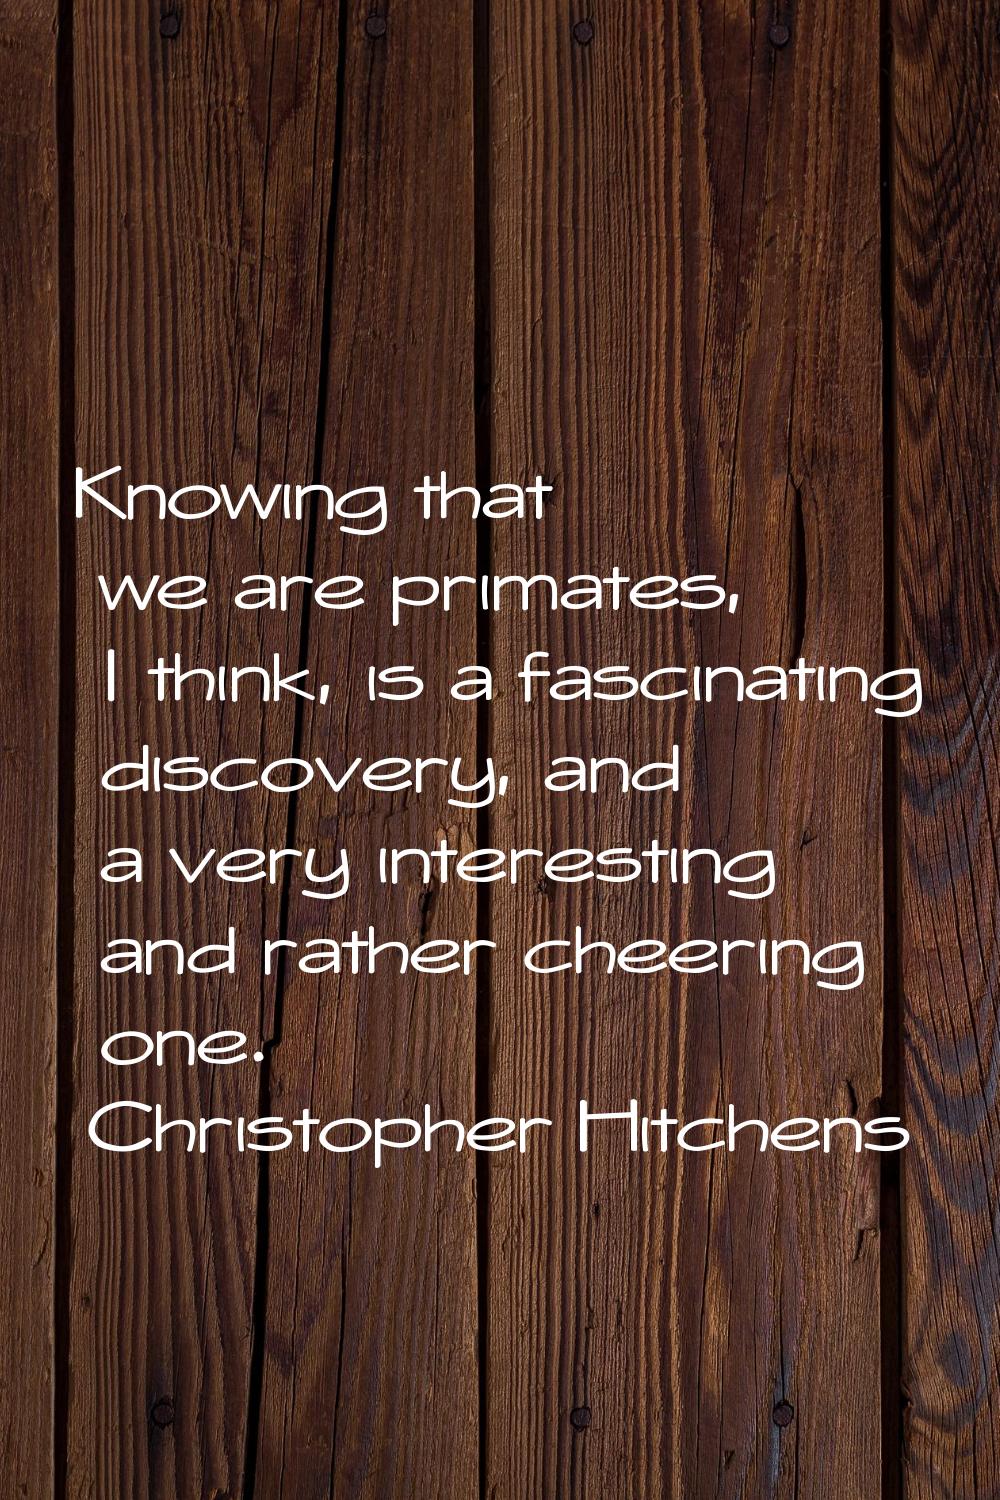 Knowing that we are primates, I think, is a fascinating discovery, and a very interesting and rathe